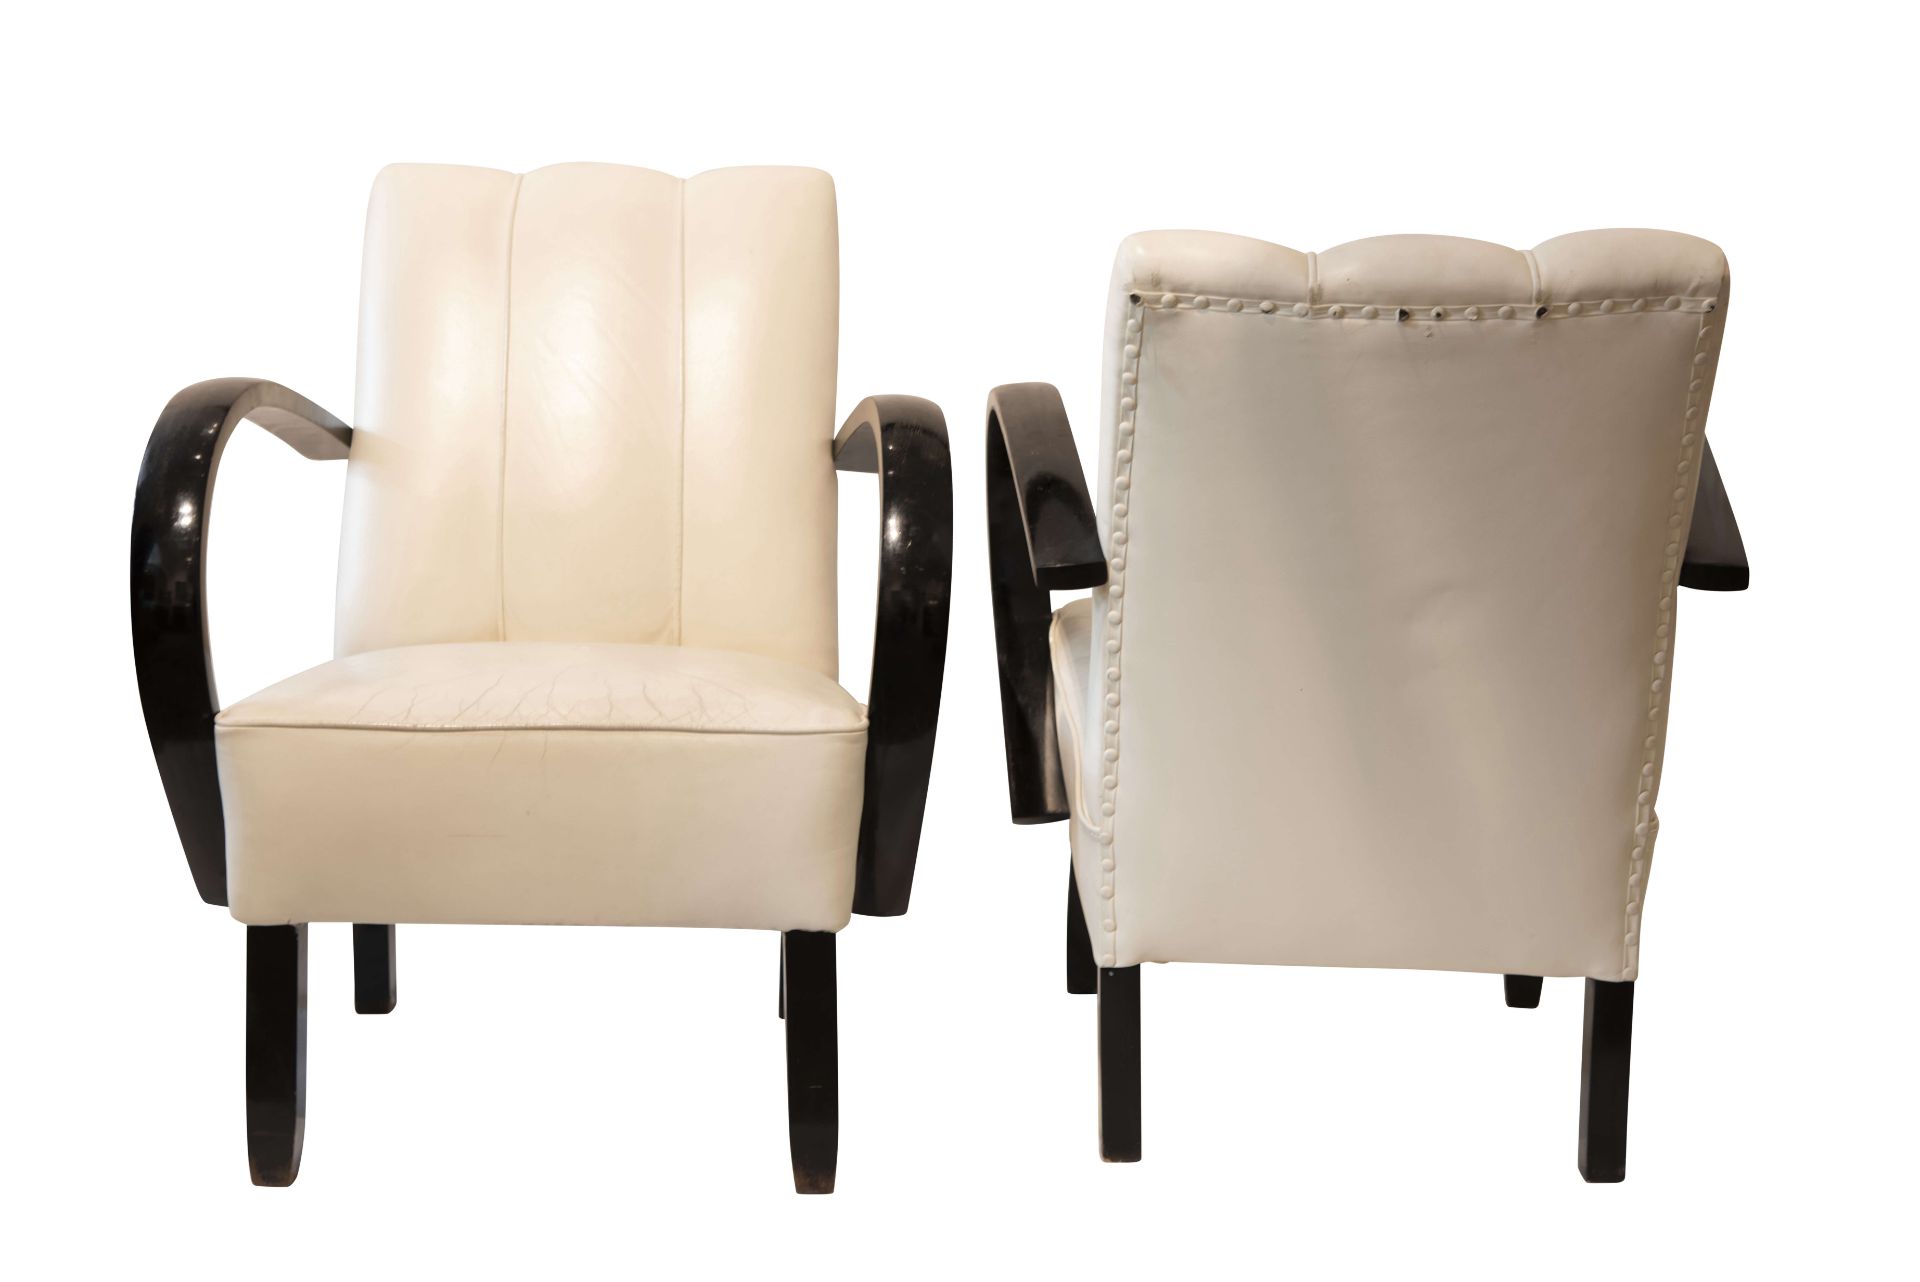 Paar Art Deco Armlehnstuhl | Pair of Leather Armchairs after a Design by Josef Hoffmann - Image 2 of 5